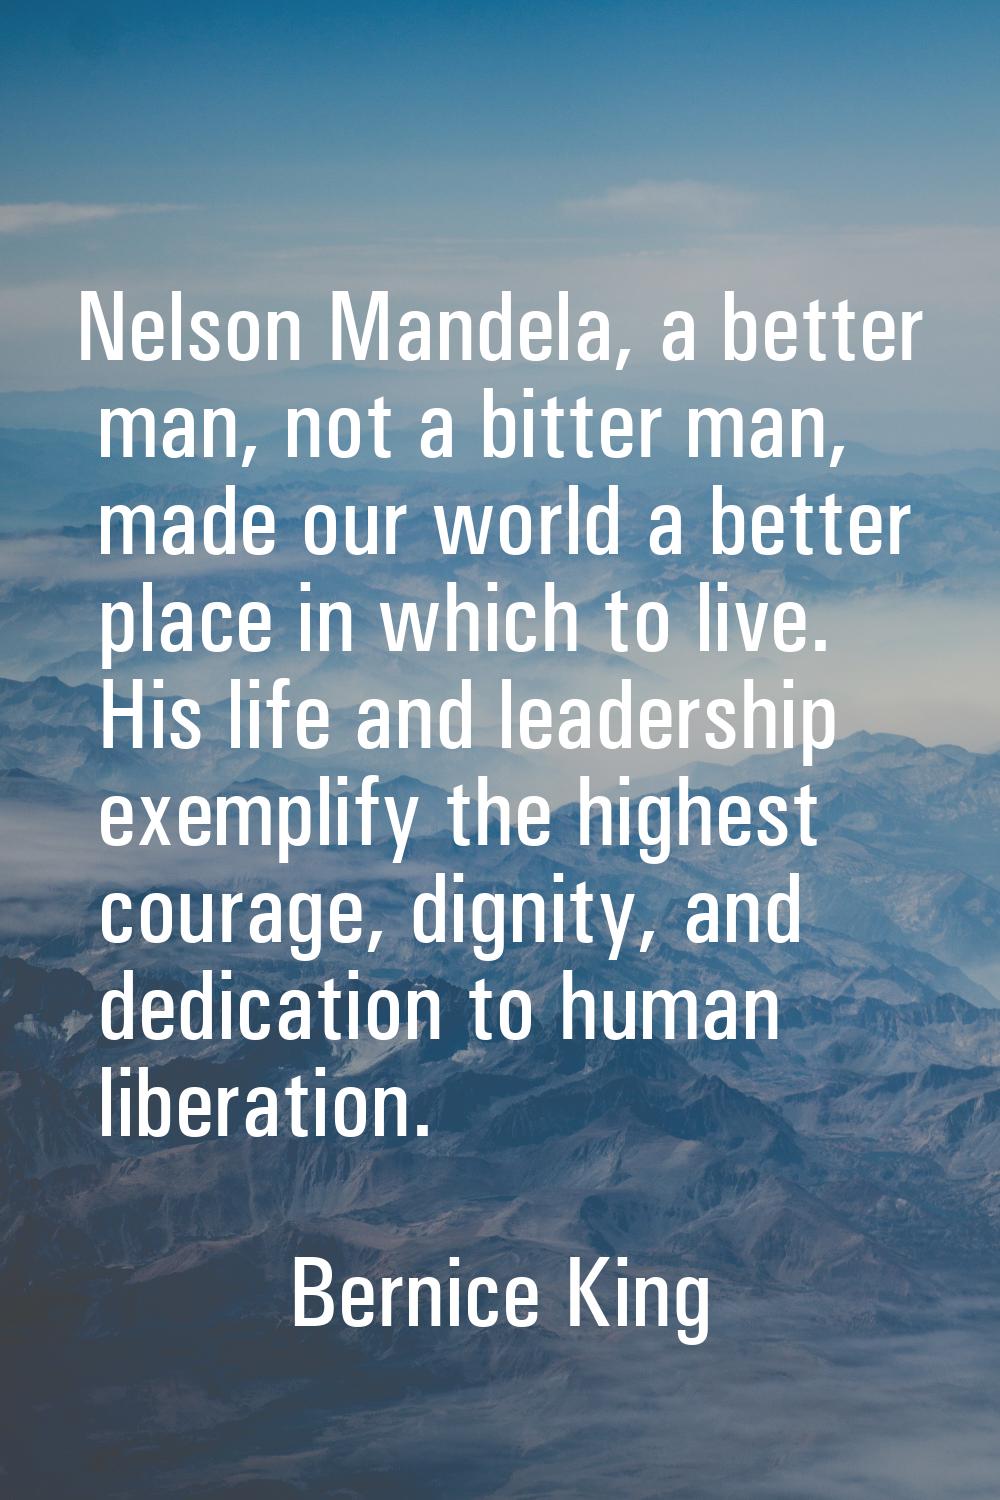 Nelson Mandela, a better man, not a bitter man, made our world a better place in which to live. His